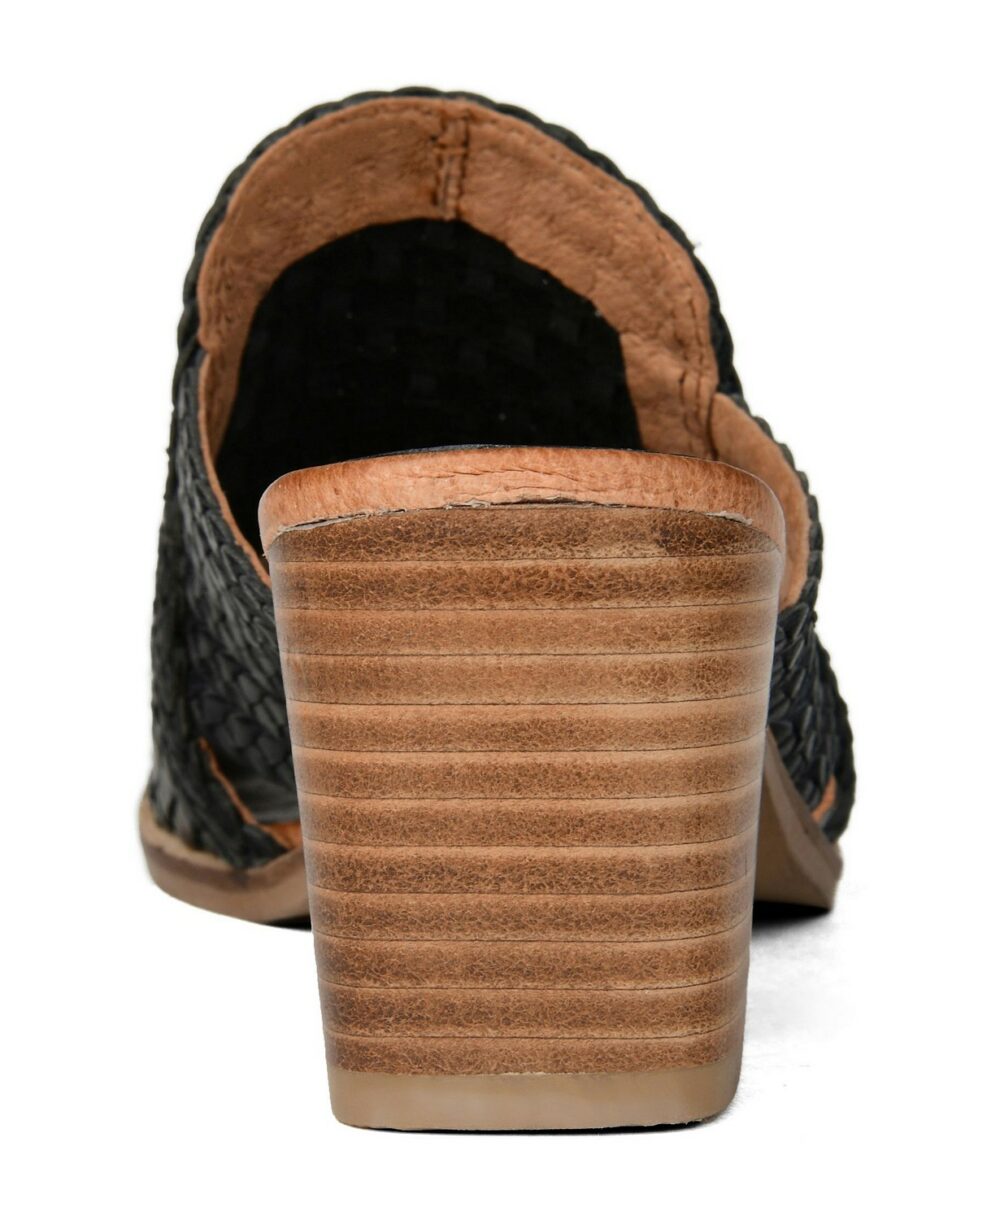 www.couturepoint.com-journee-collection-womens-black-leather-keeva-mule-sandals